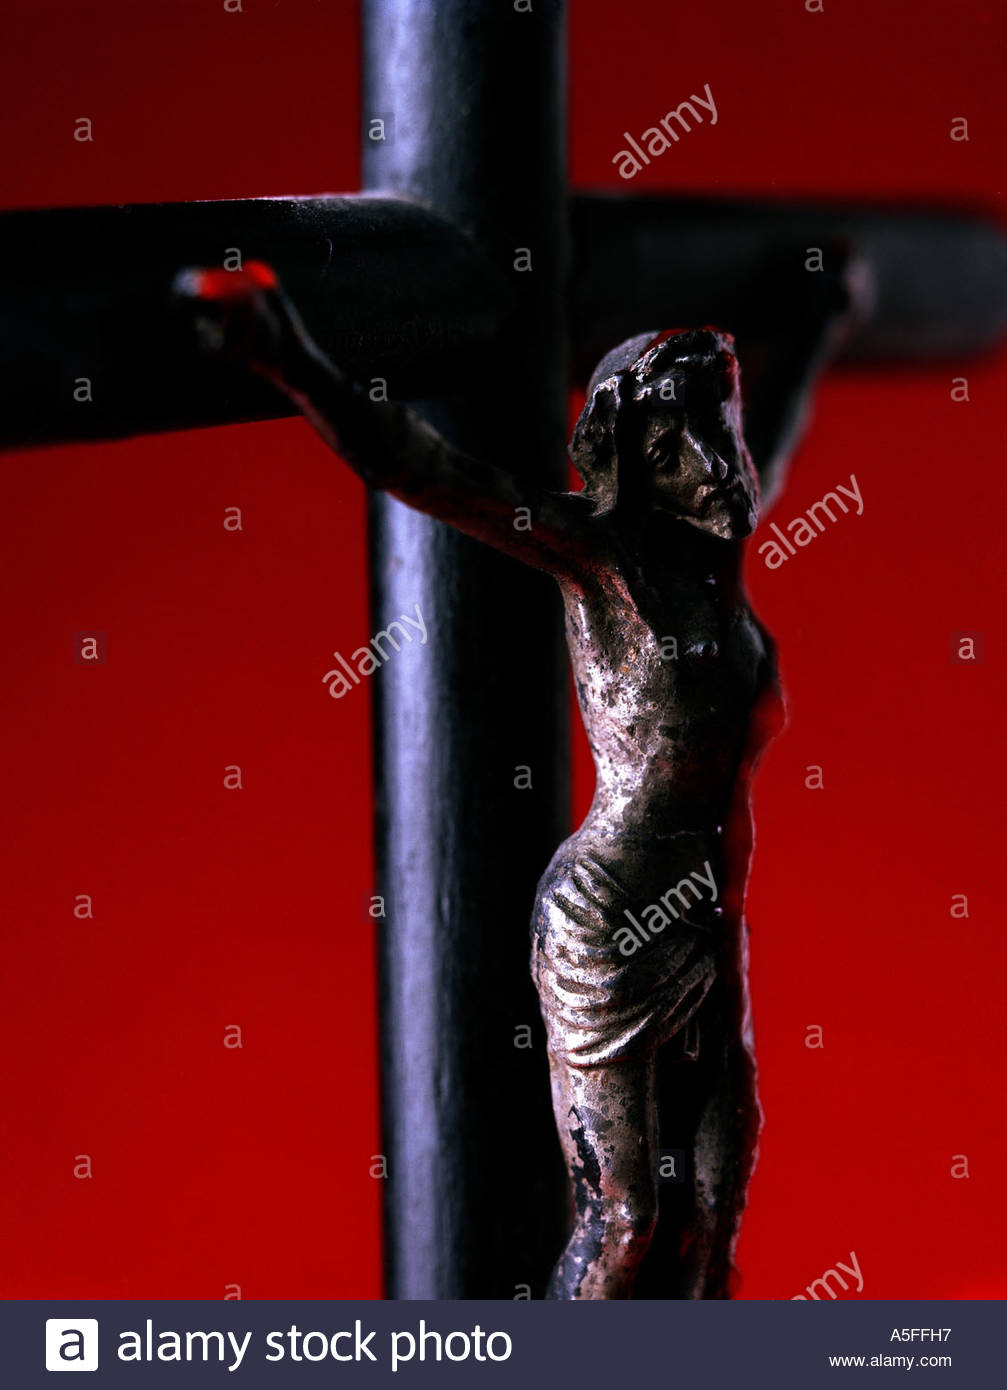 Christ Crucified High Resolution Stock Photography and Images - Alamy